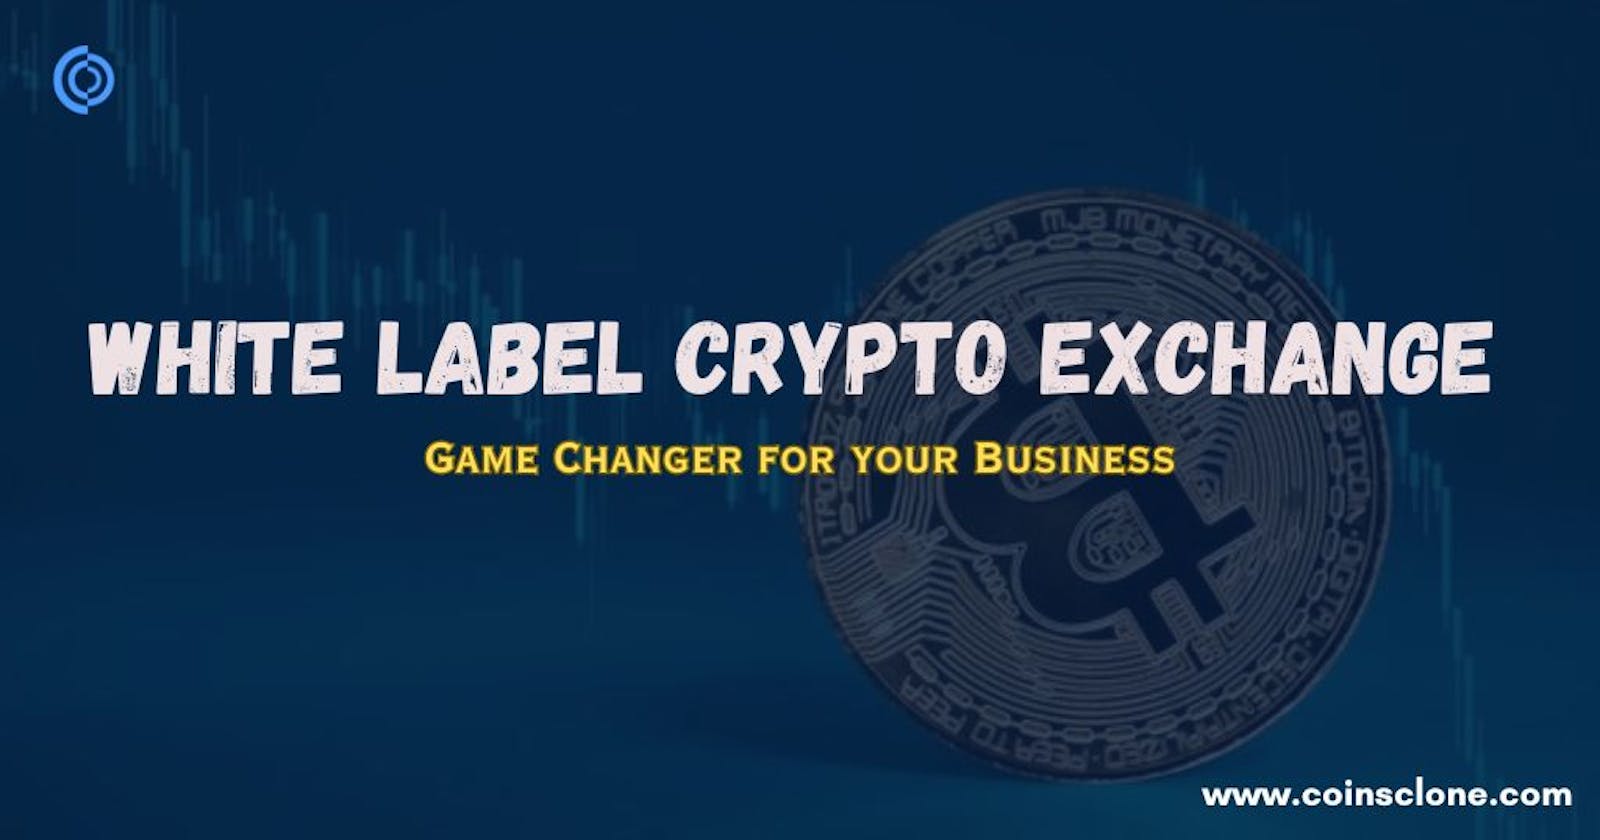 Revenue Factors to Consider When Choosing a White Label Cryptocurrency Exchange